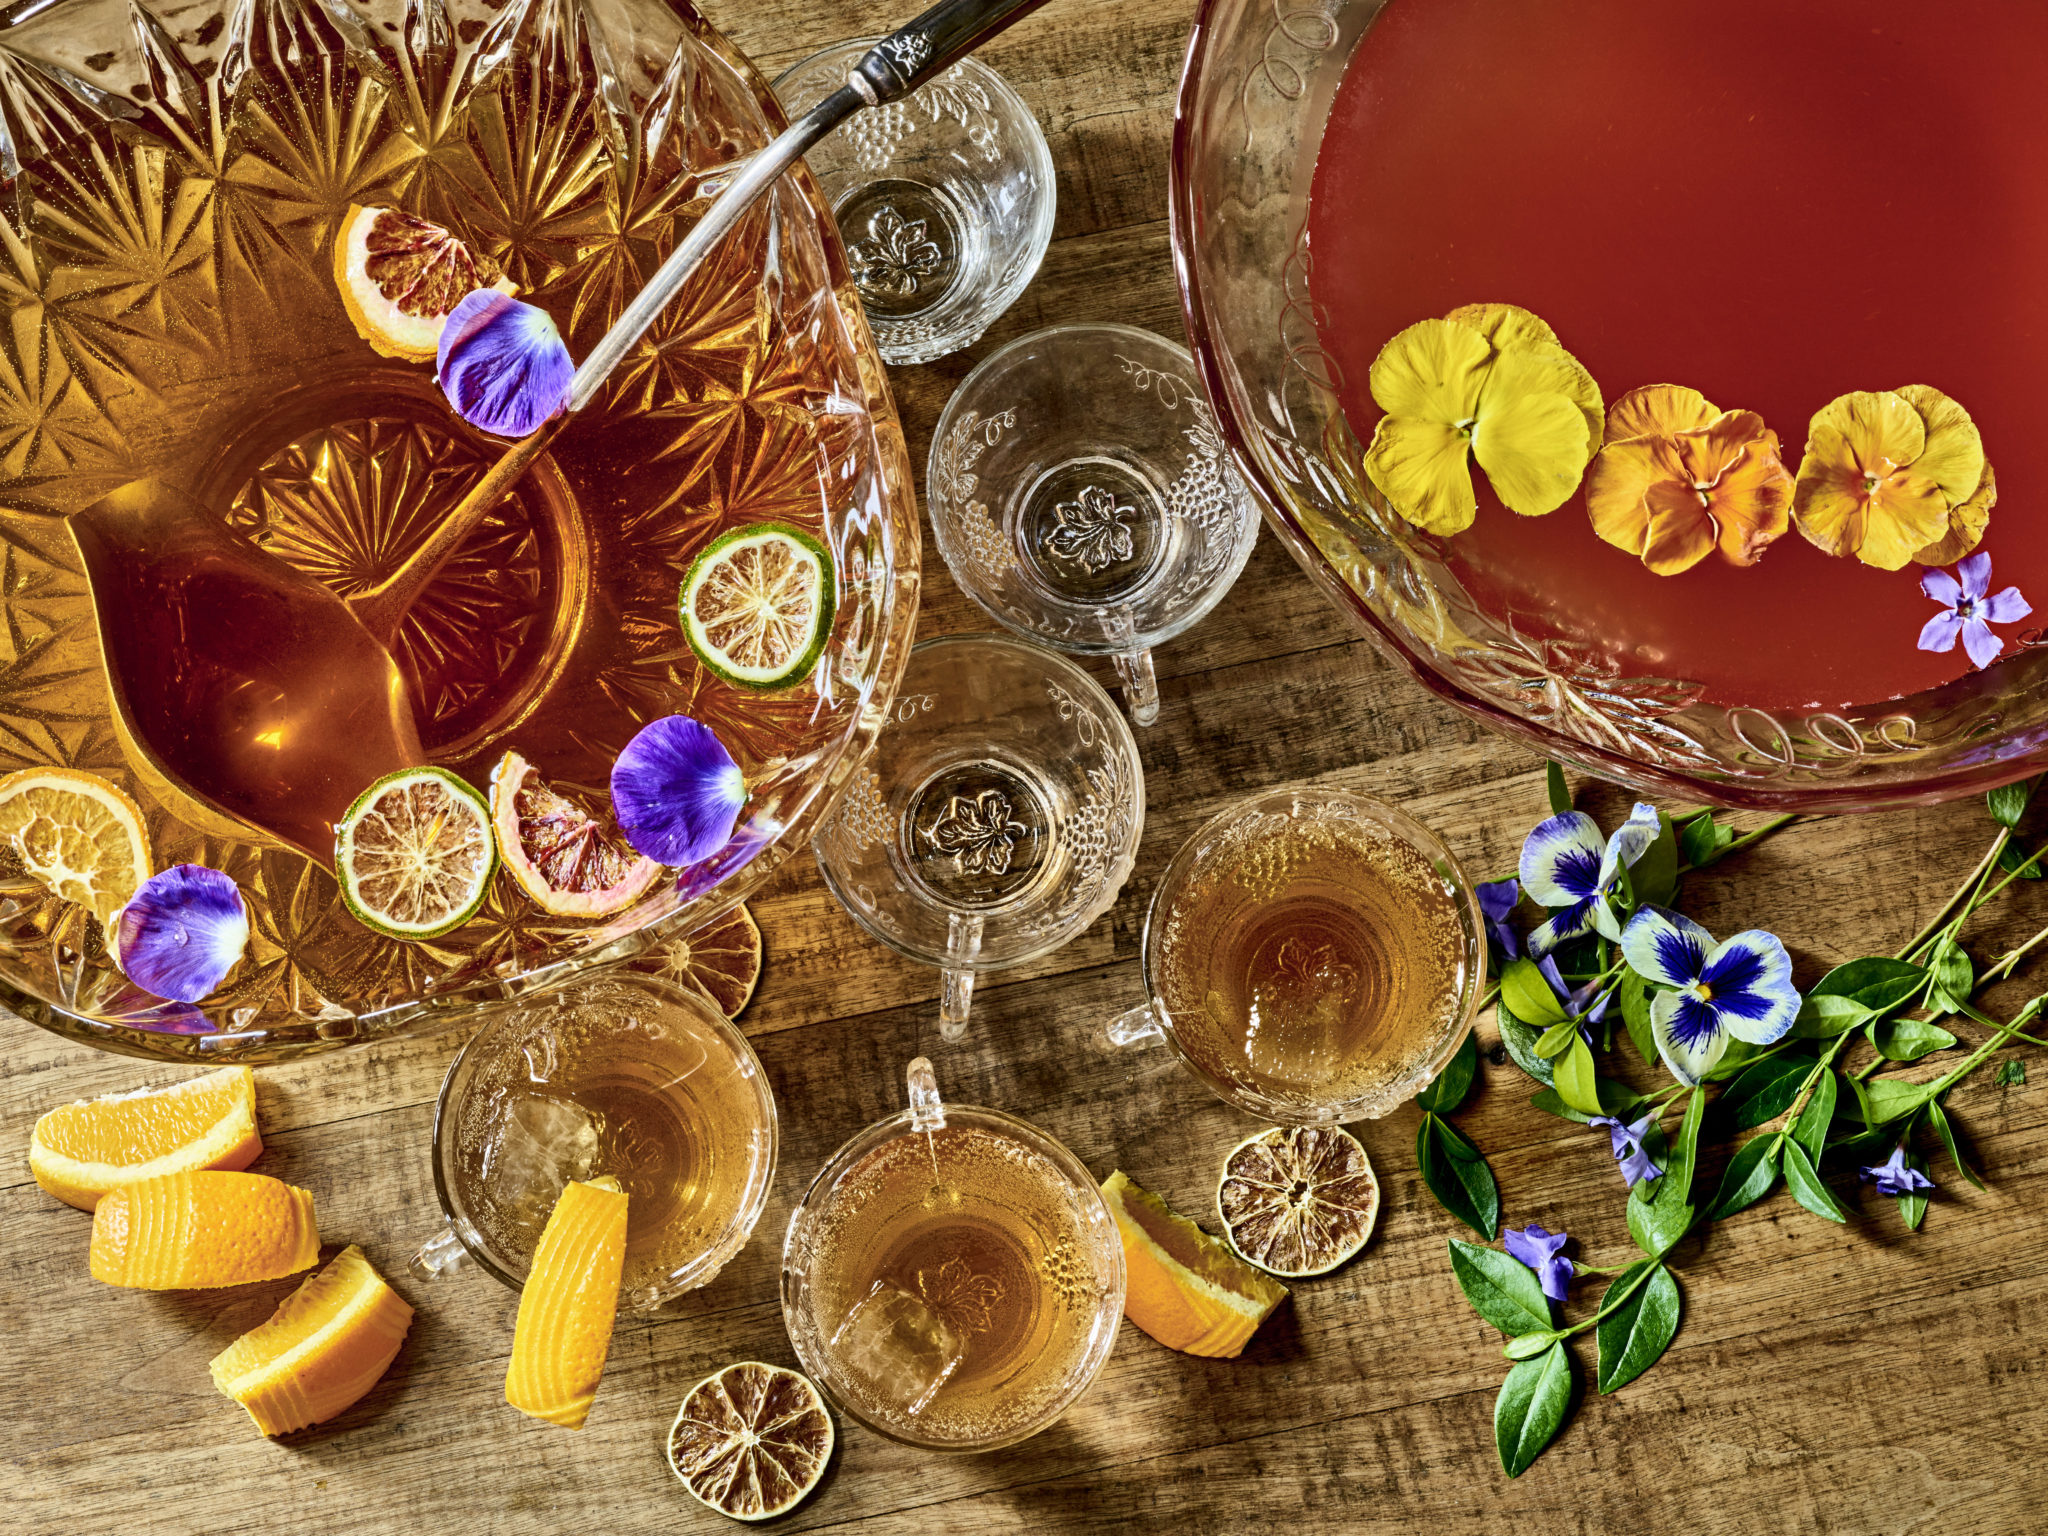 Frame Recipe: Jaz's Party Rum Punch